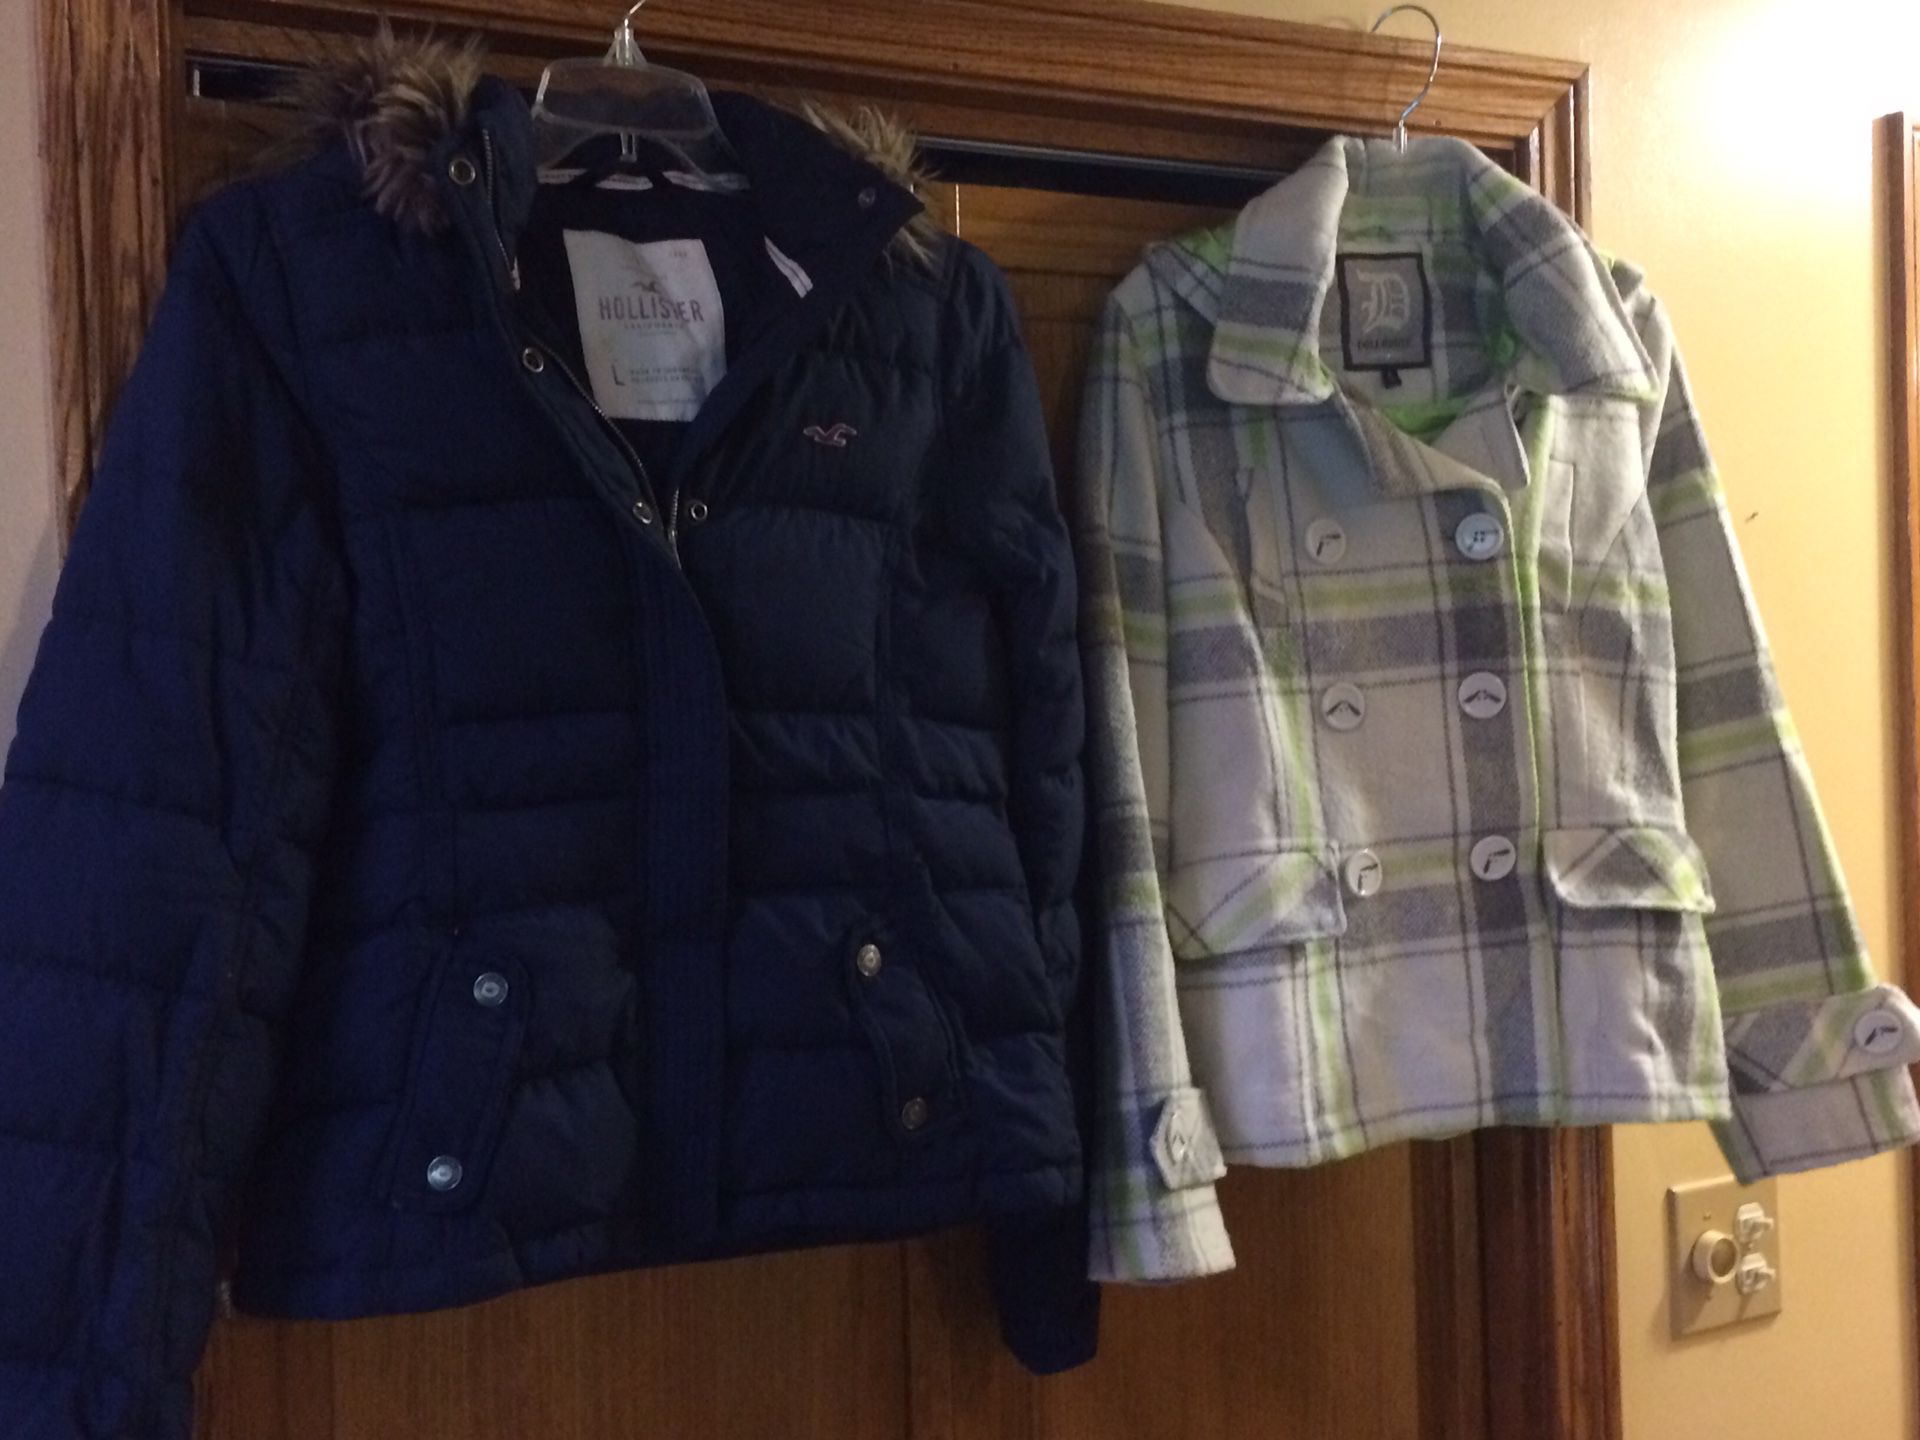 Holister Jacket with hoodie Large $40 and Pea Coat size M adult $30